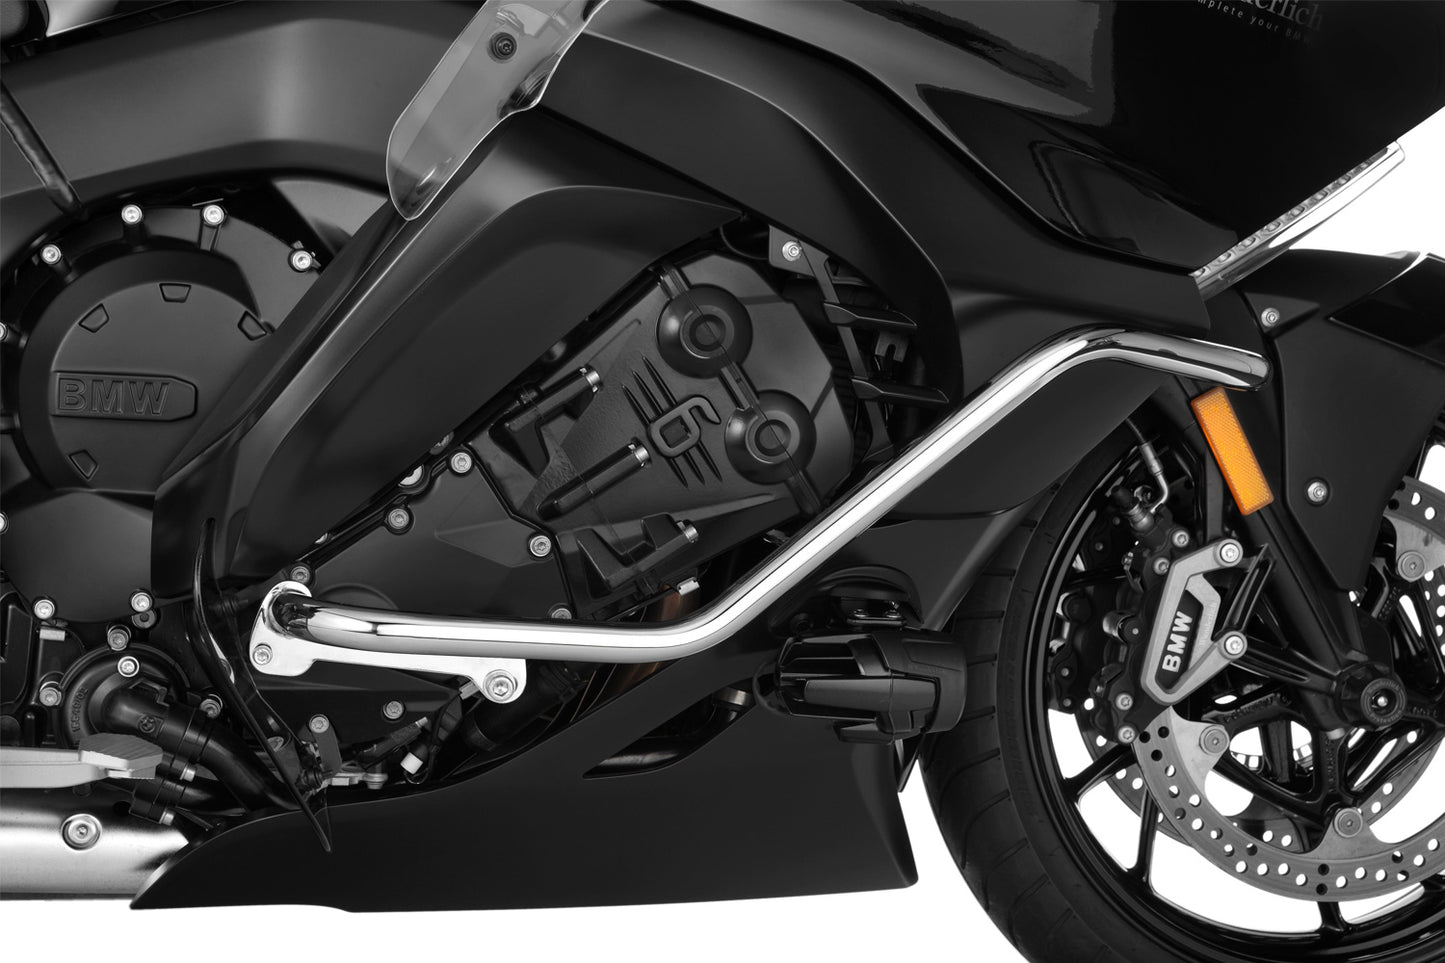 WUNDERLICH Pare-Cylindres "Bagger Style" - Chrome K1600B